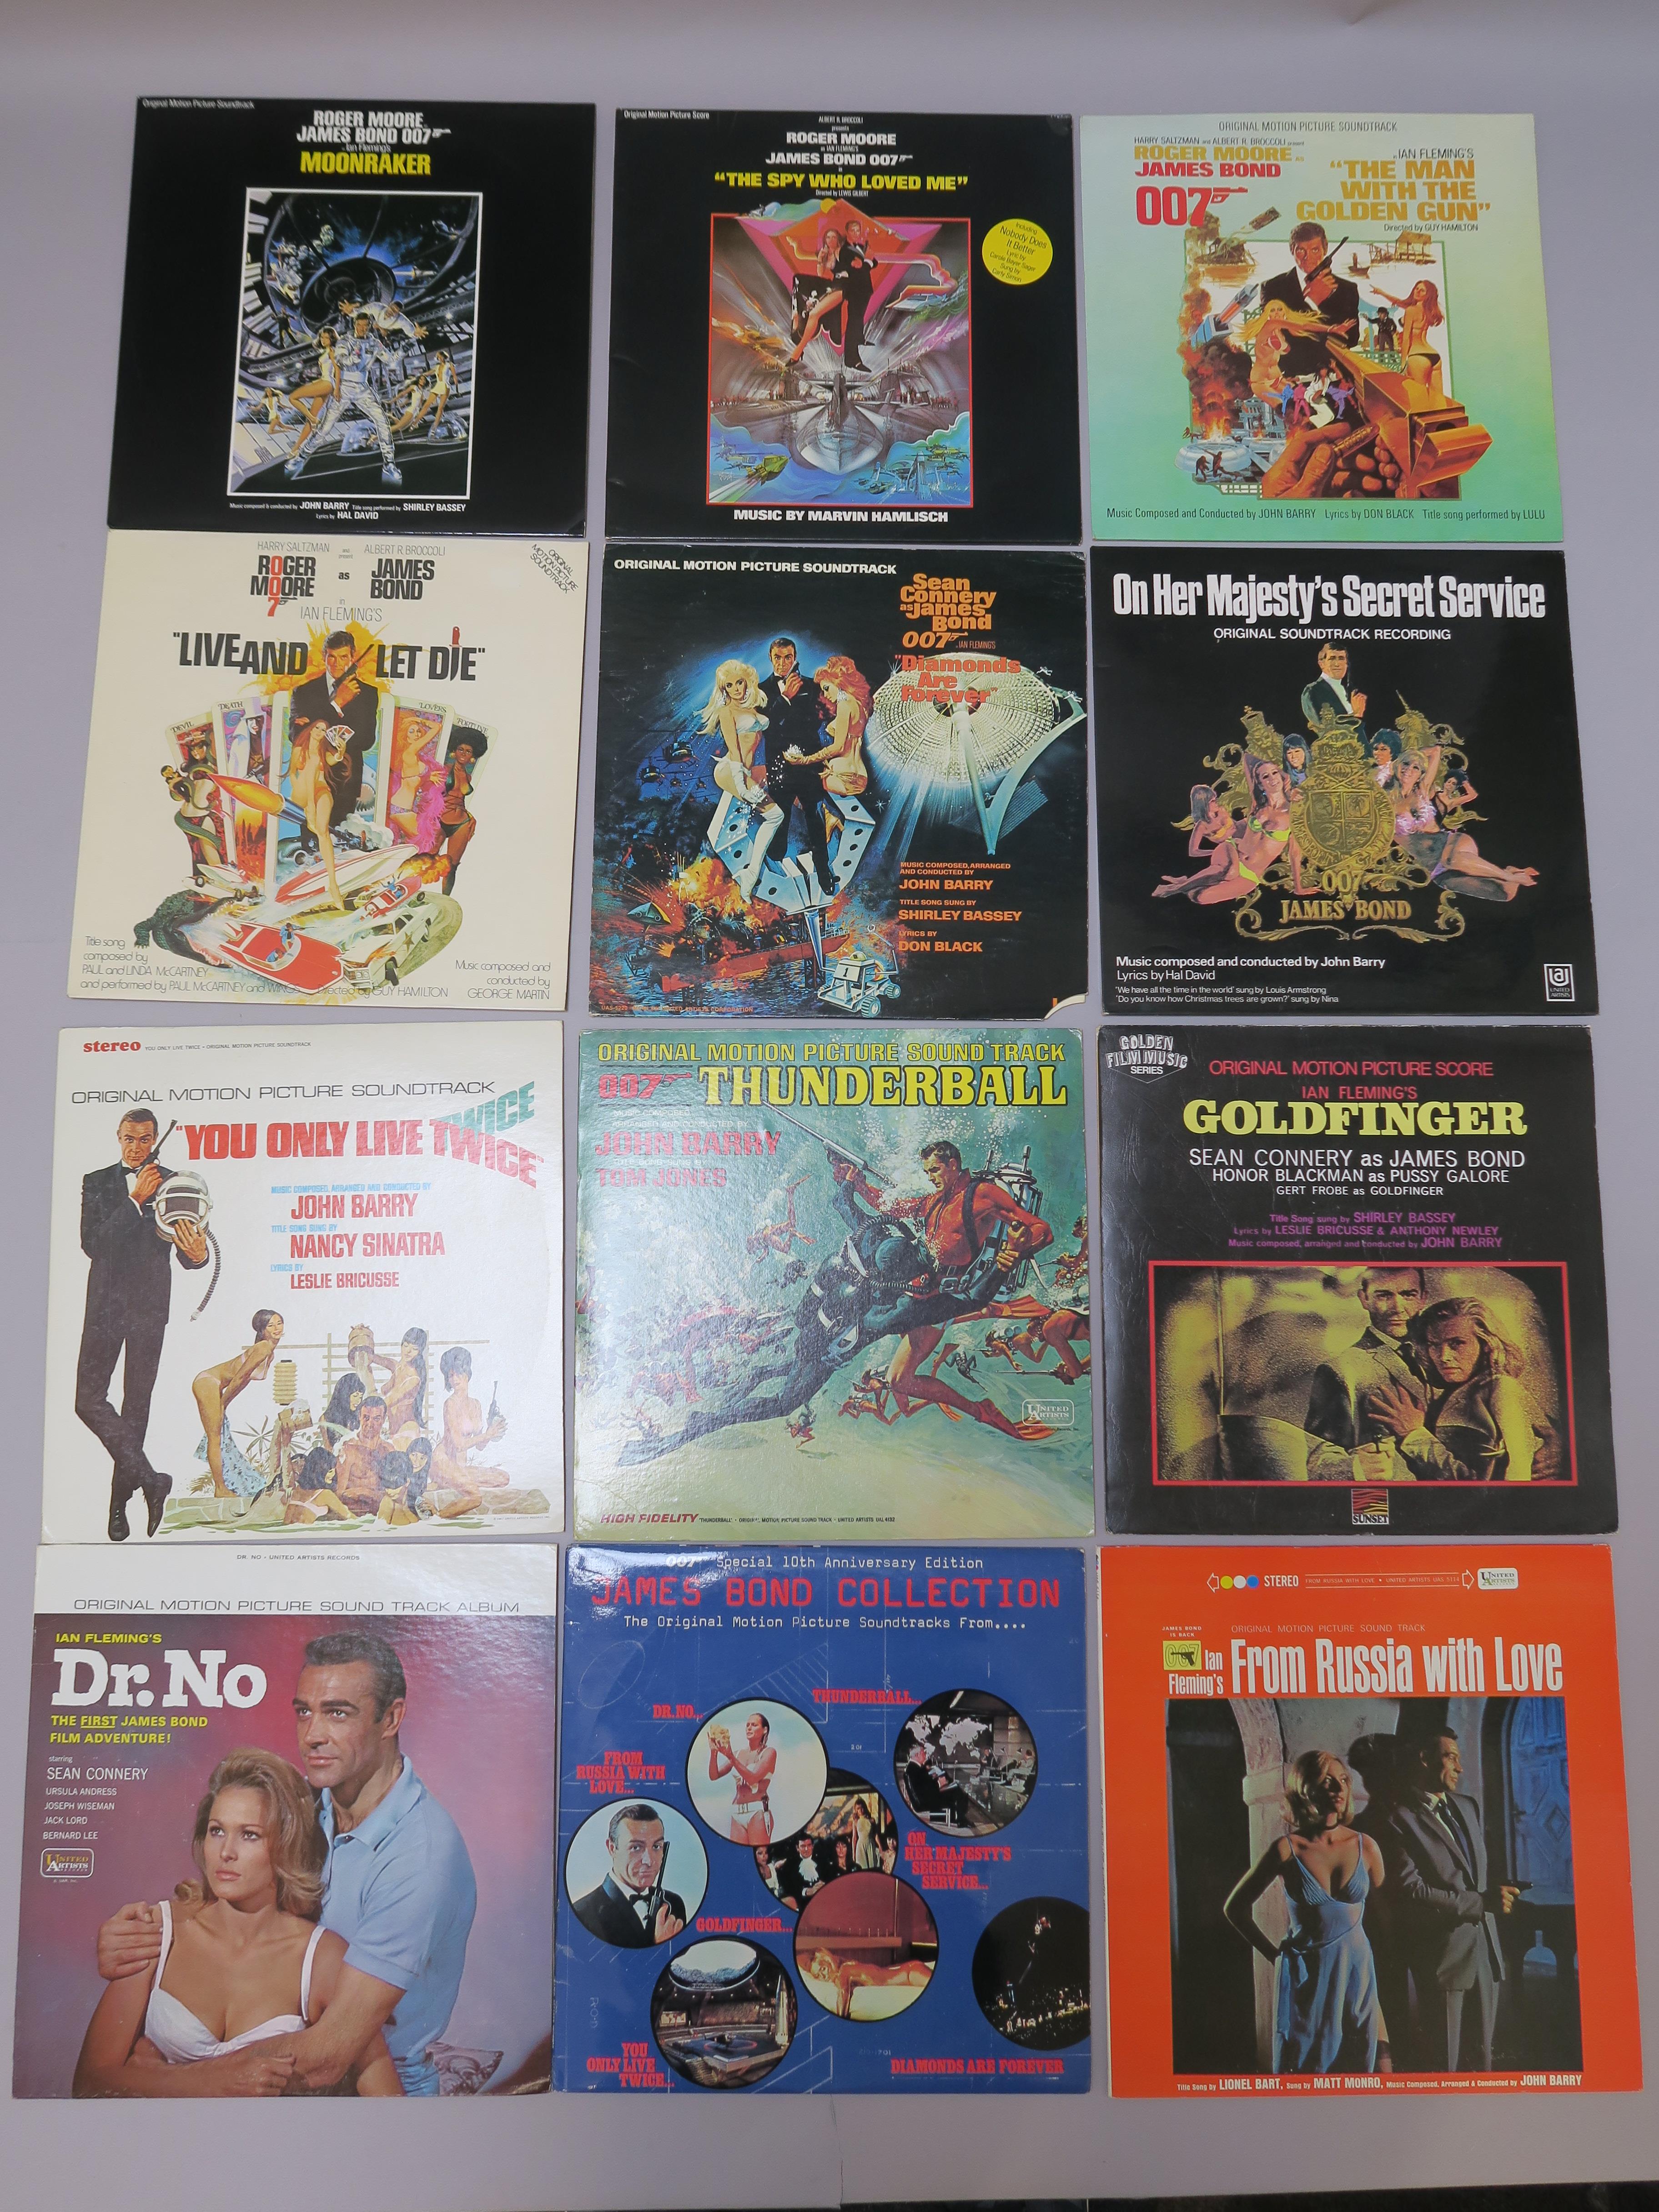 James Bond collection of original movie soundtracks on LP's including Dr No, From Russia With